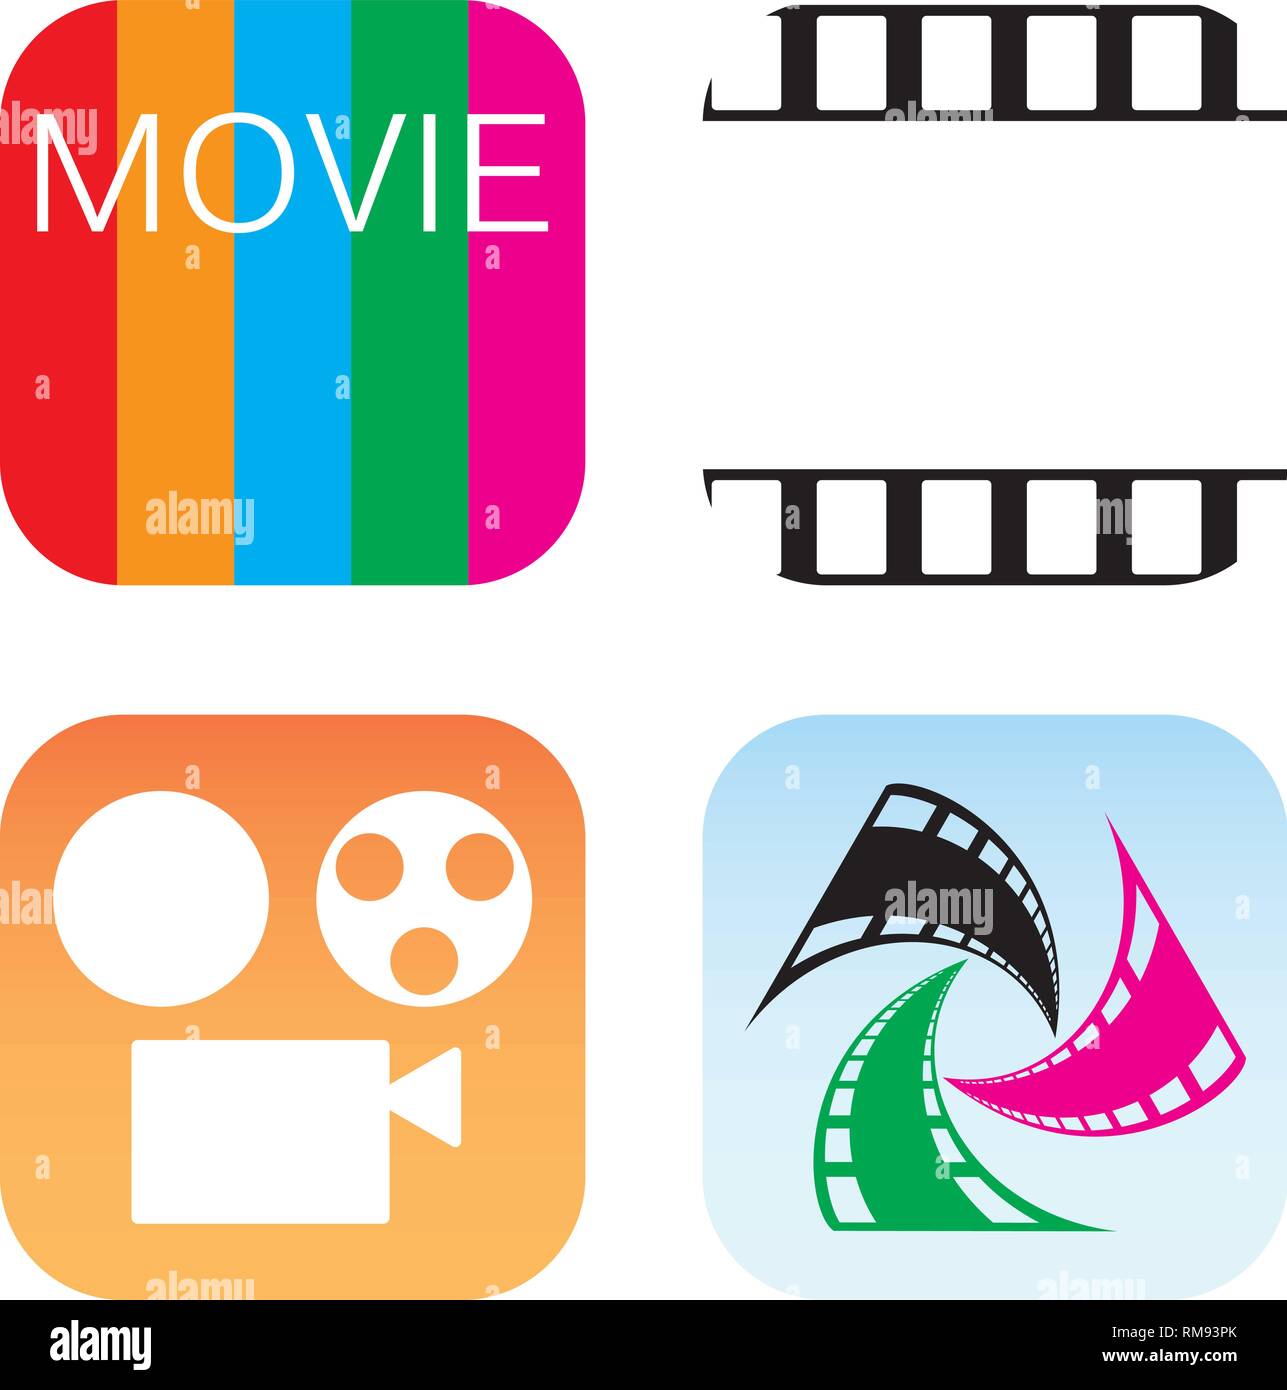 Mini movies Stock Vector Images - Alamy